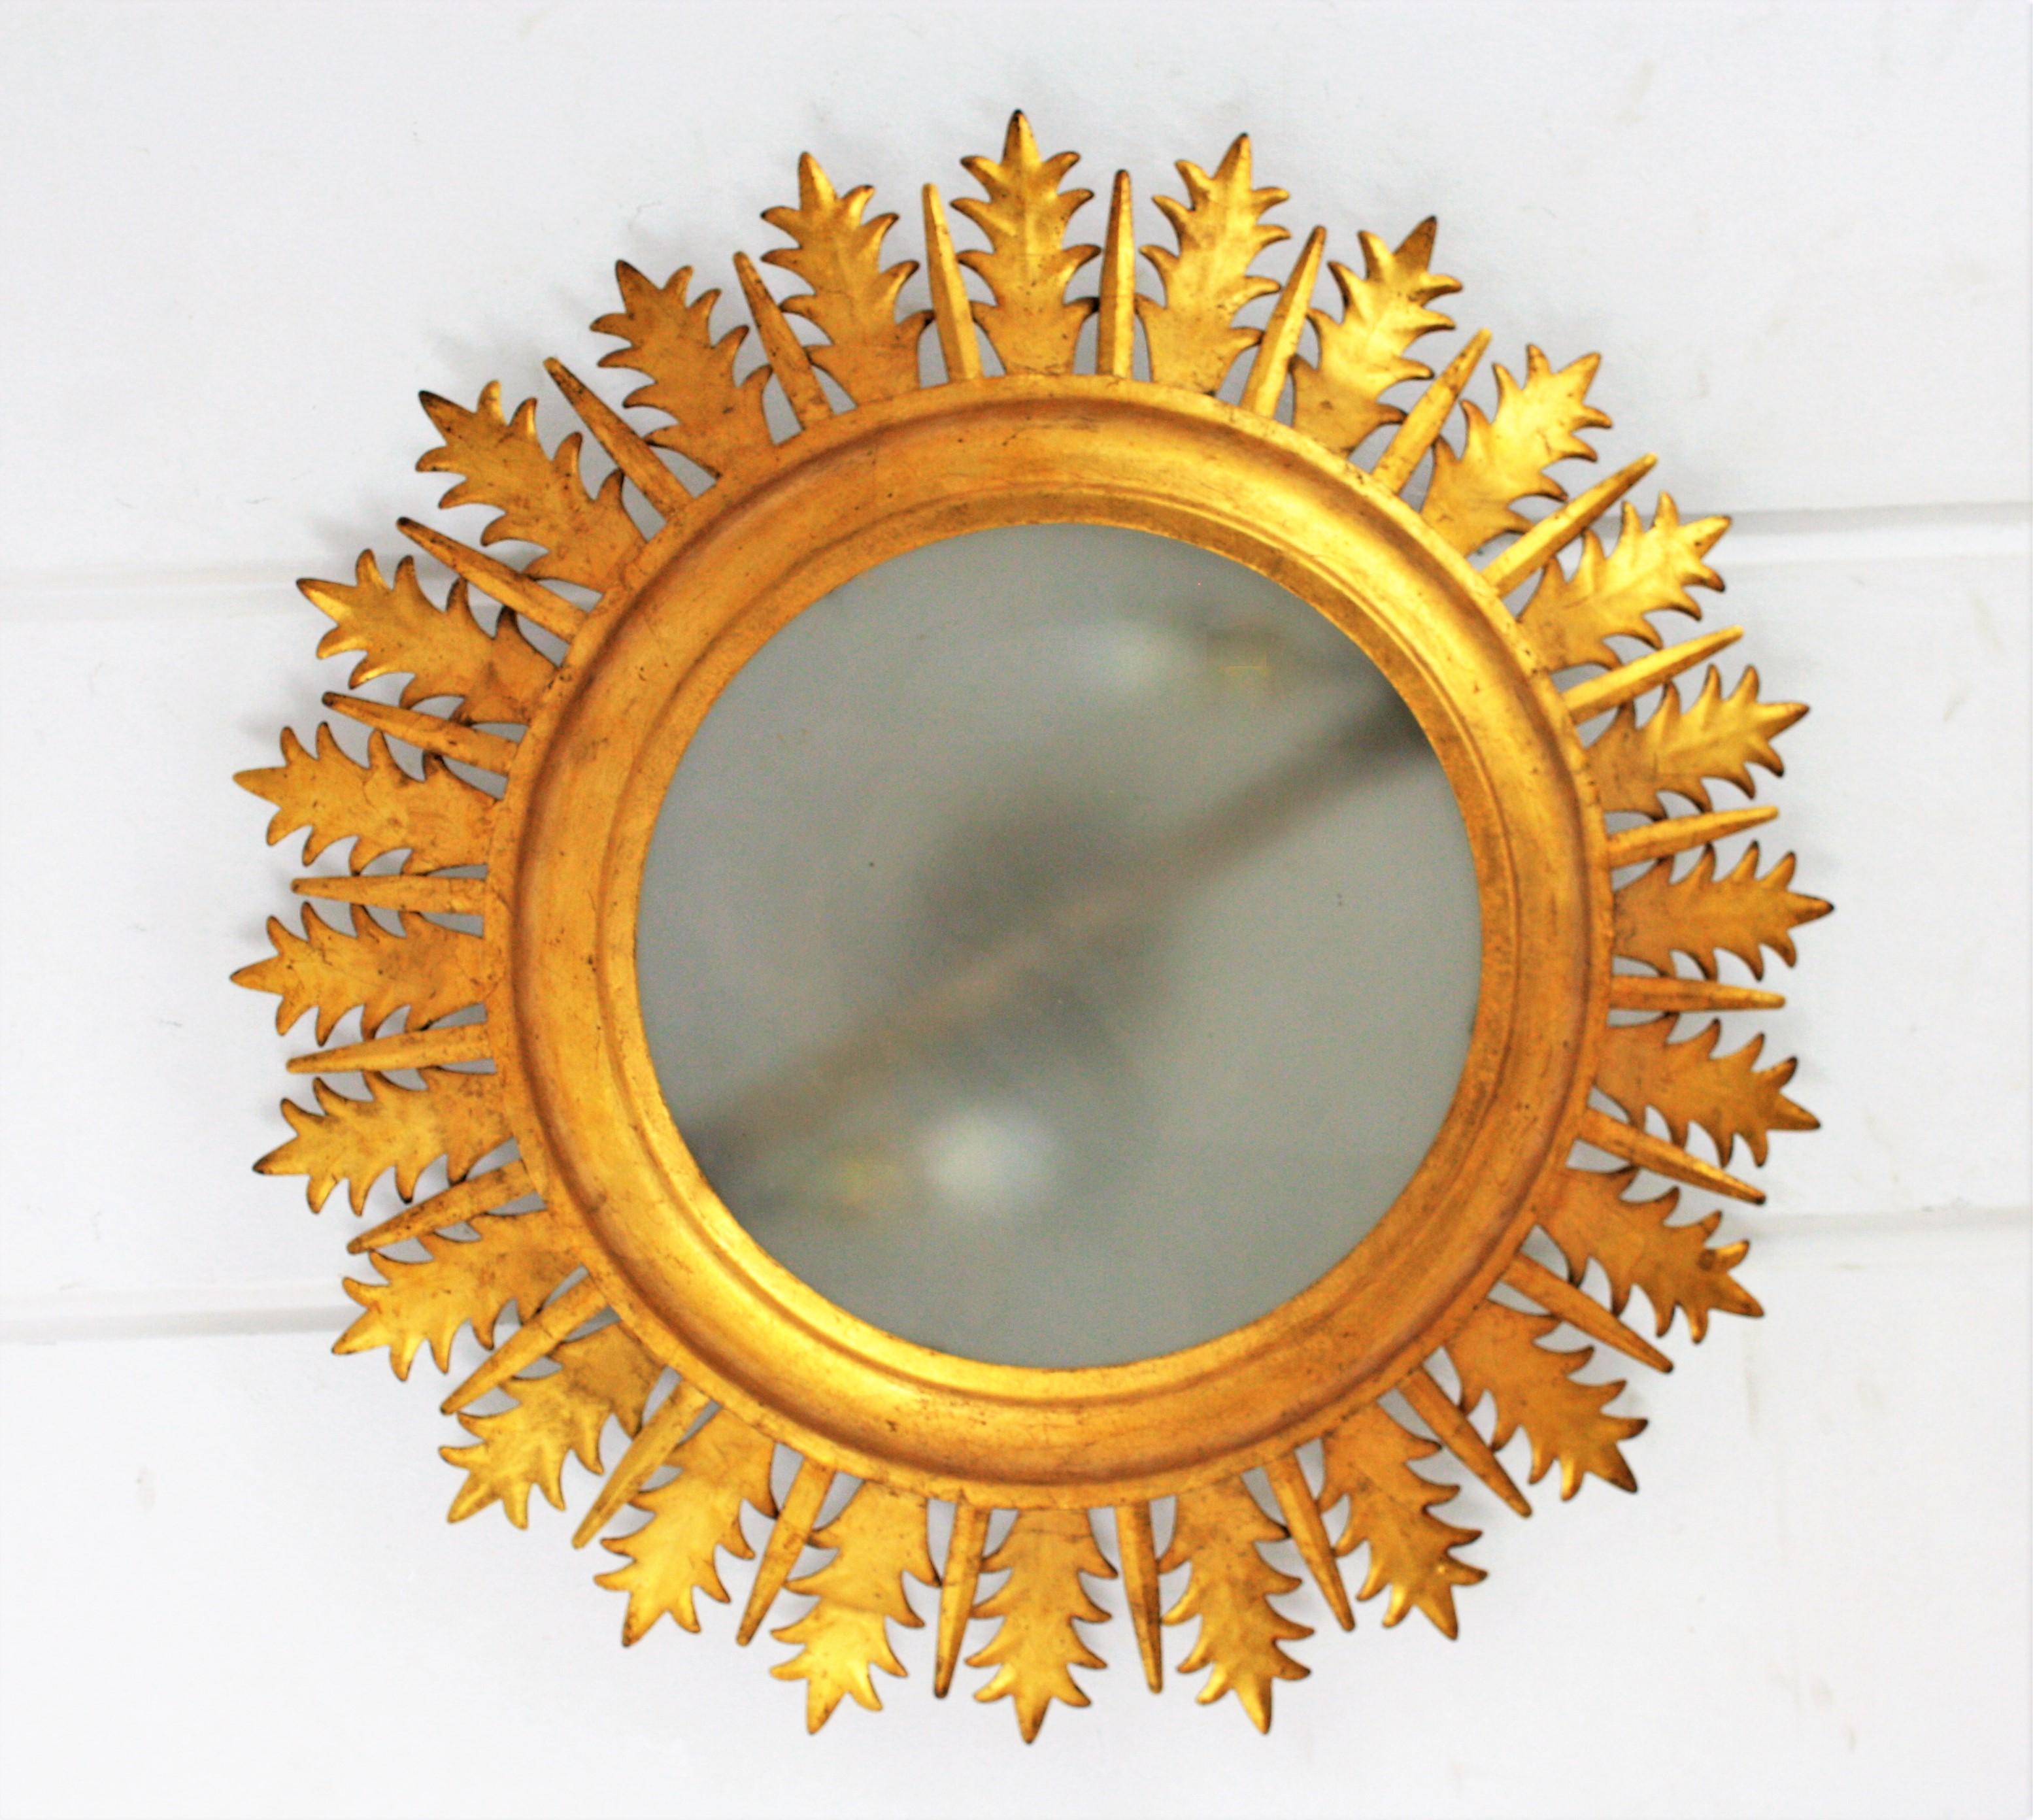 Spanish Extra Large Gilt Iron Crown Sunburst Ceiling Light Fixture with Frosted Glass